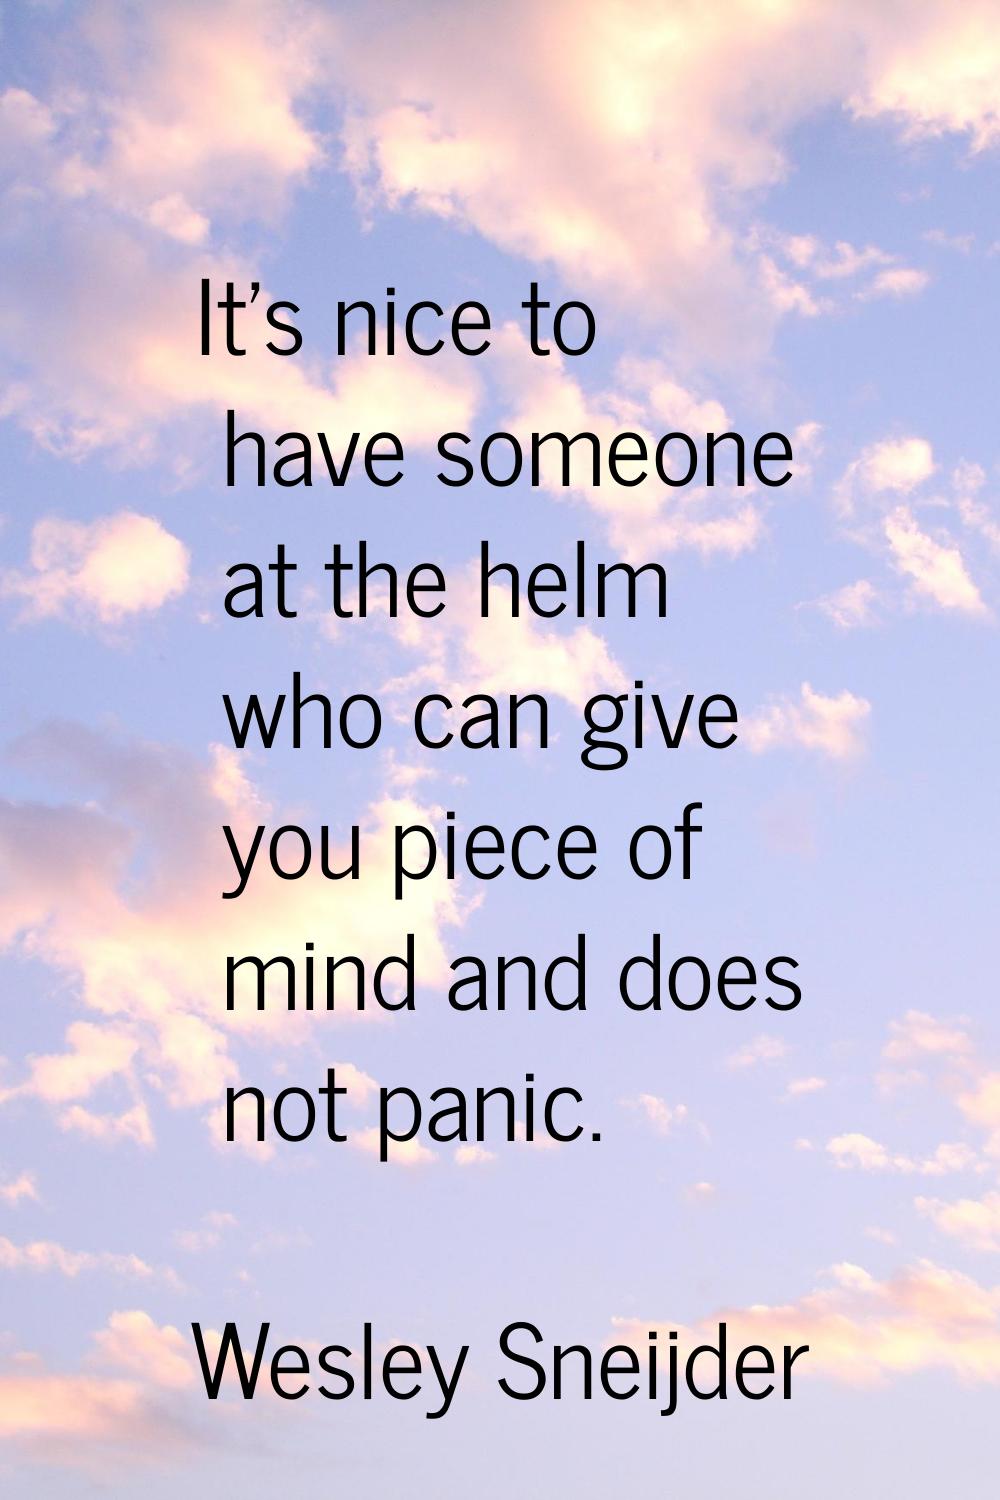 It's nice to have someone at the helm who can give you piece of mind and does not panic.